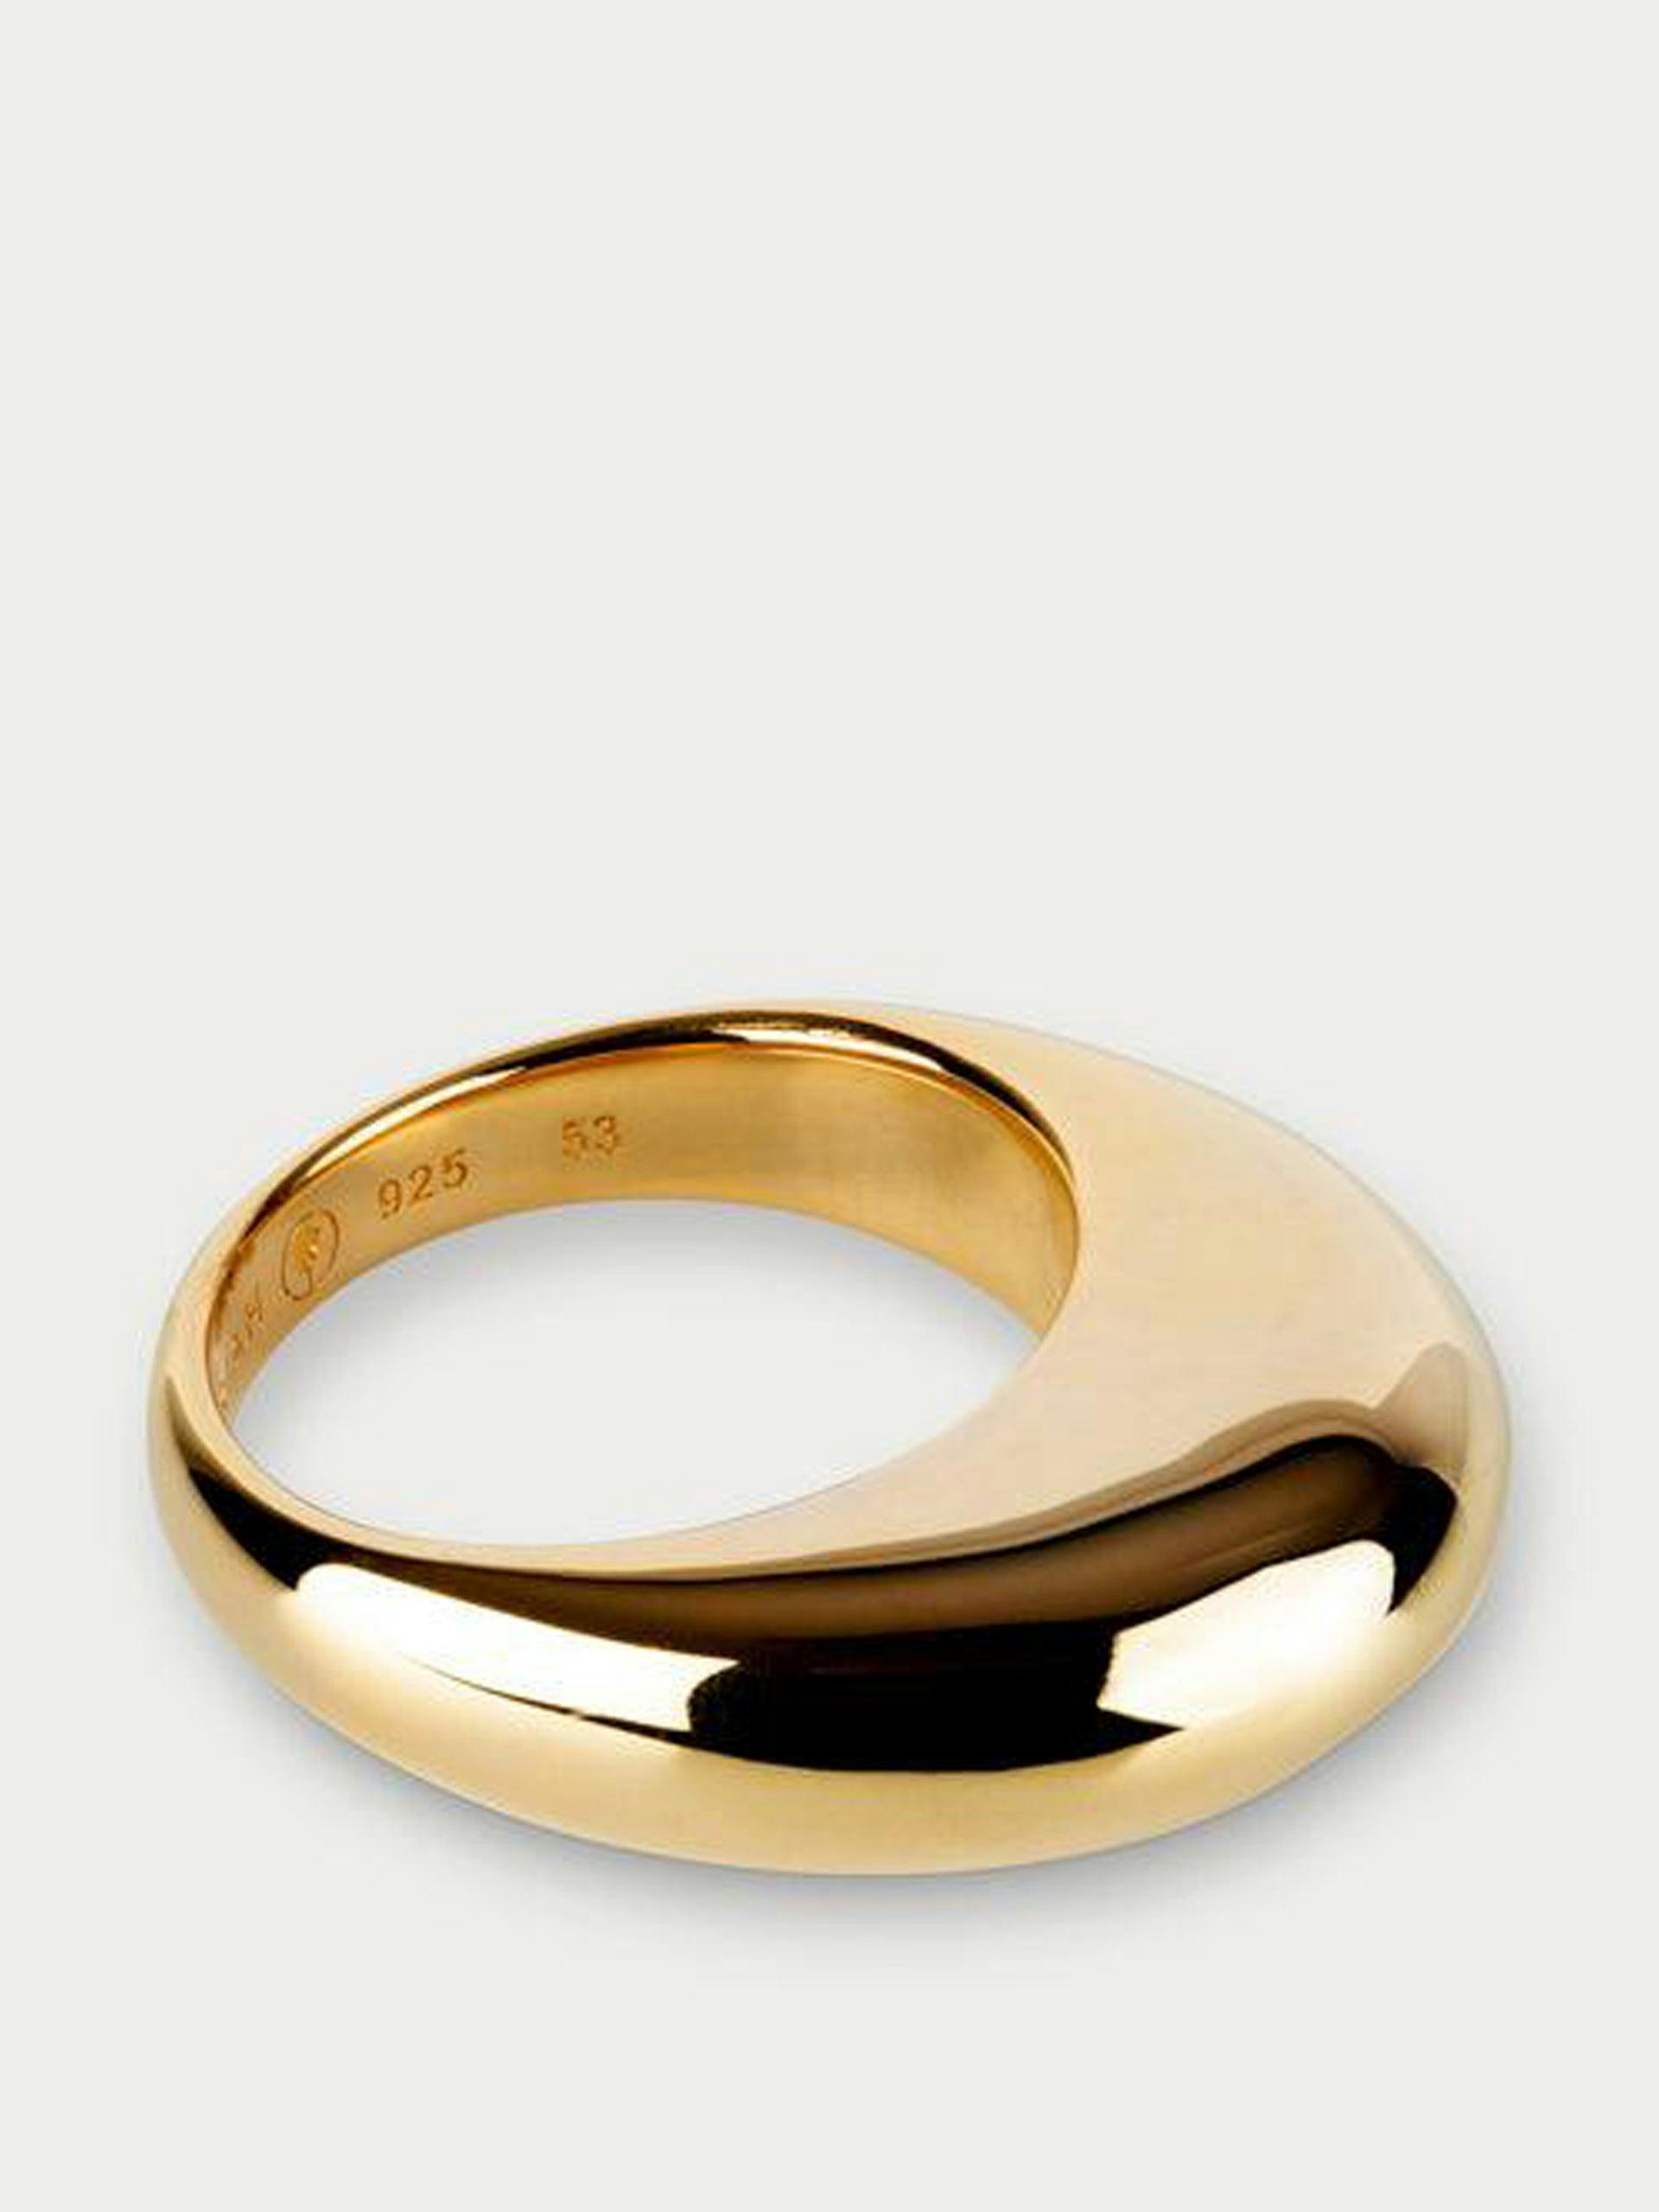 The Curve ring